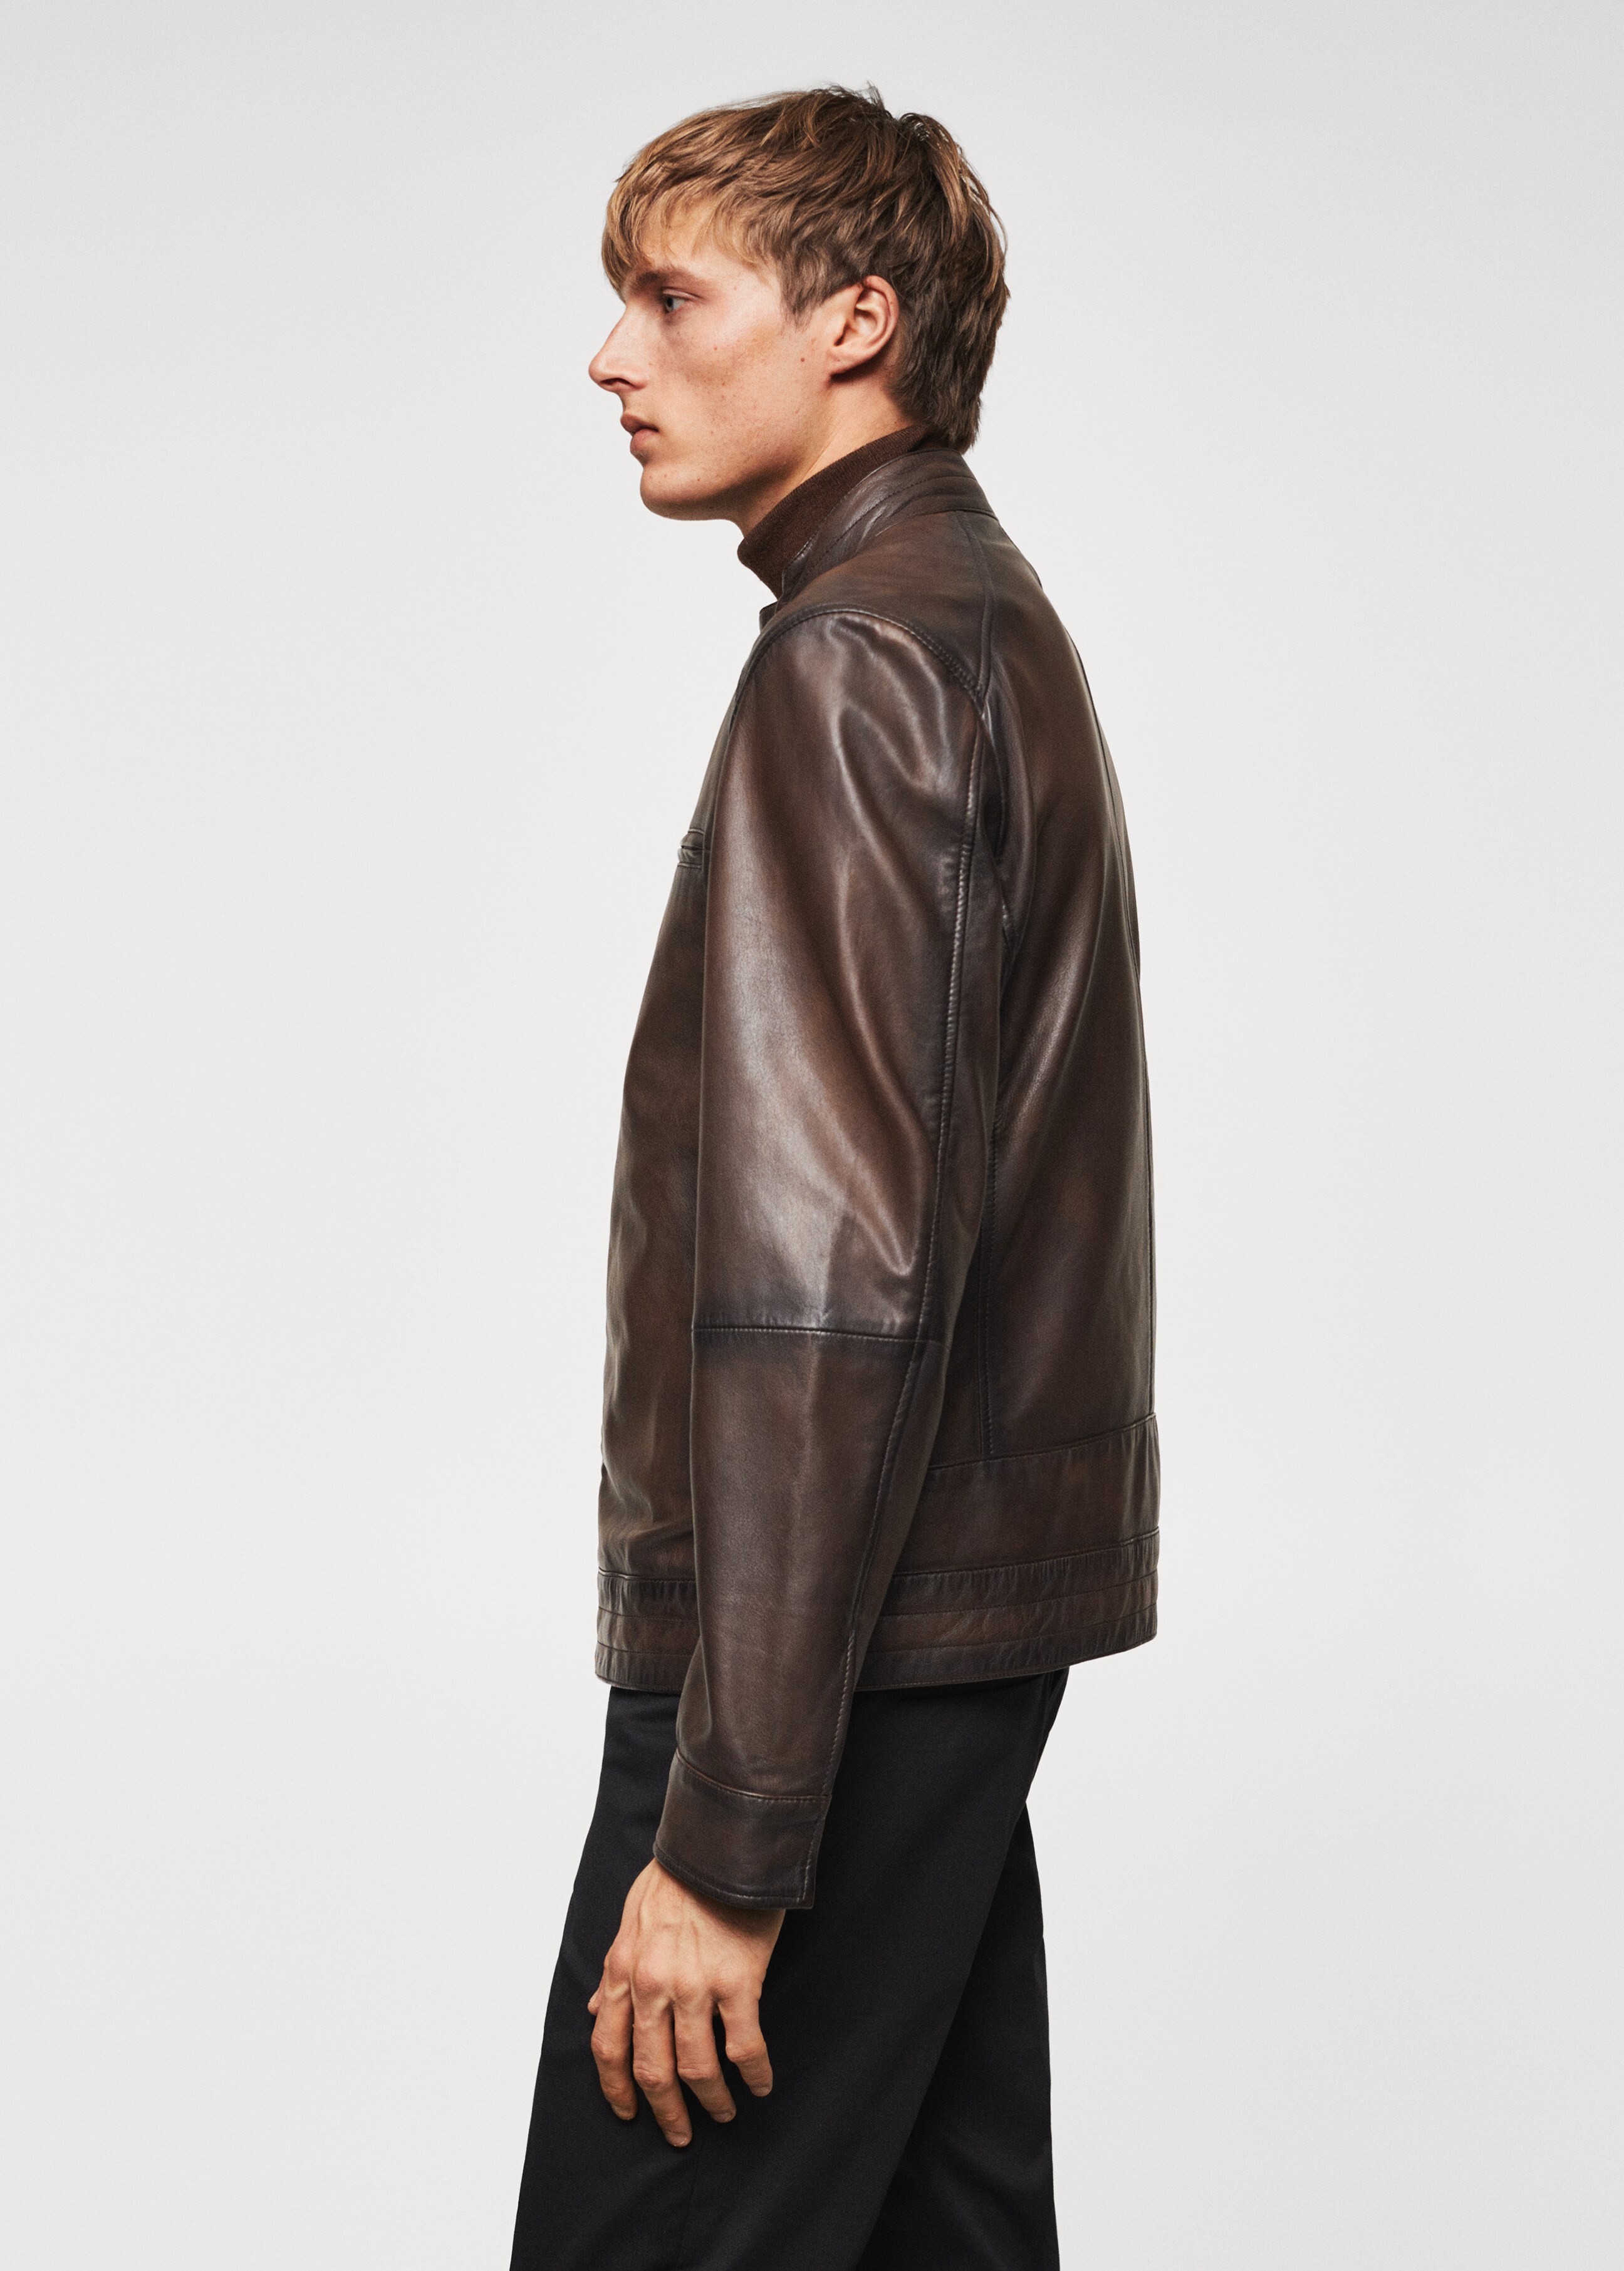 Pocket leather jacket - Details of the article 6